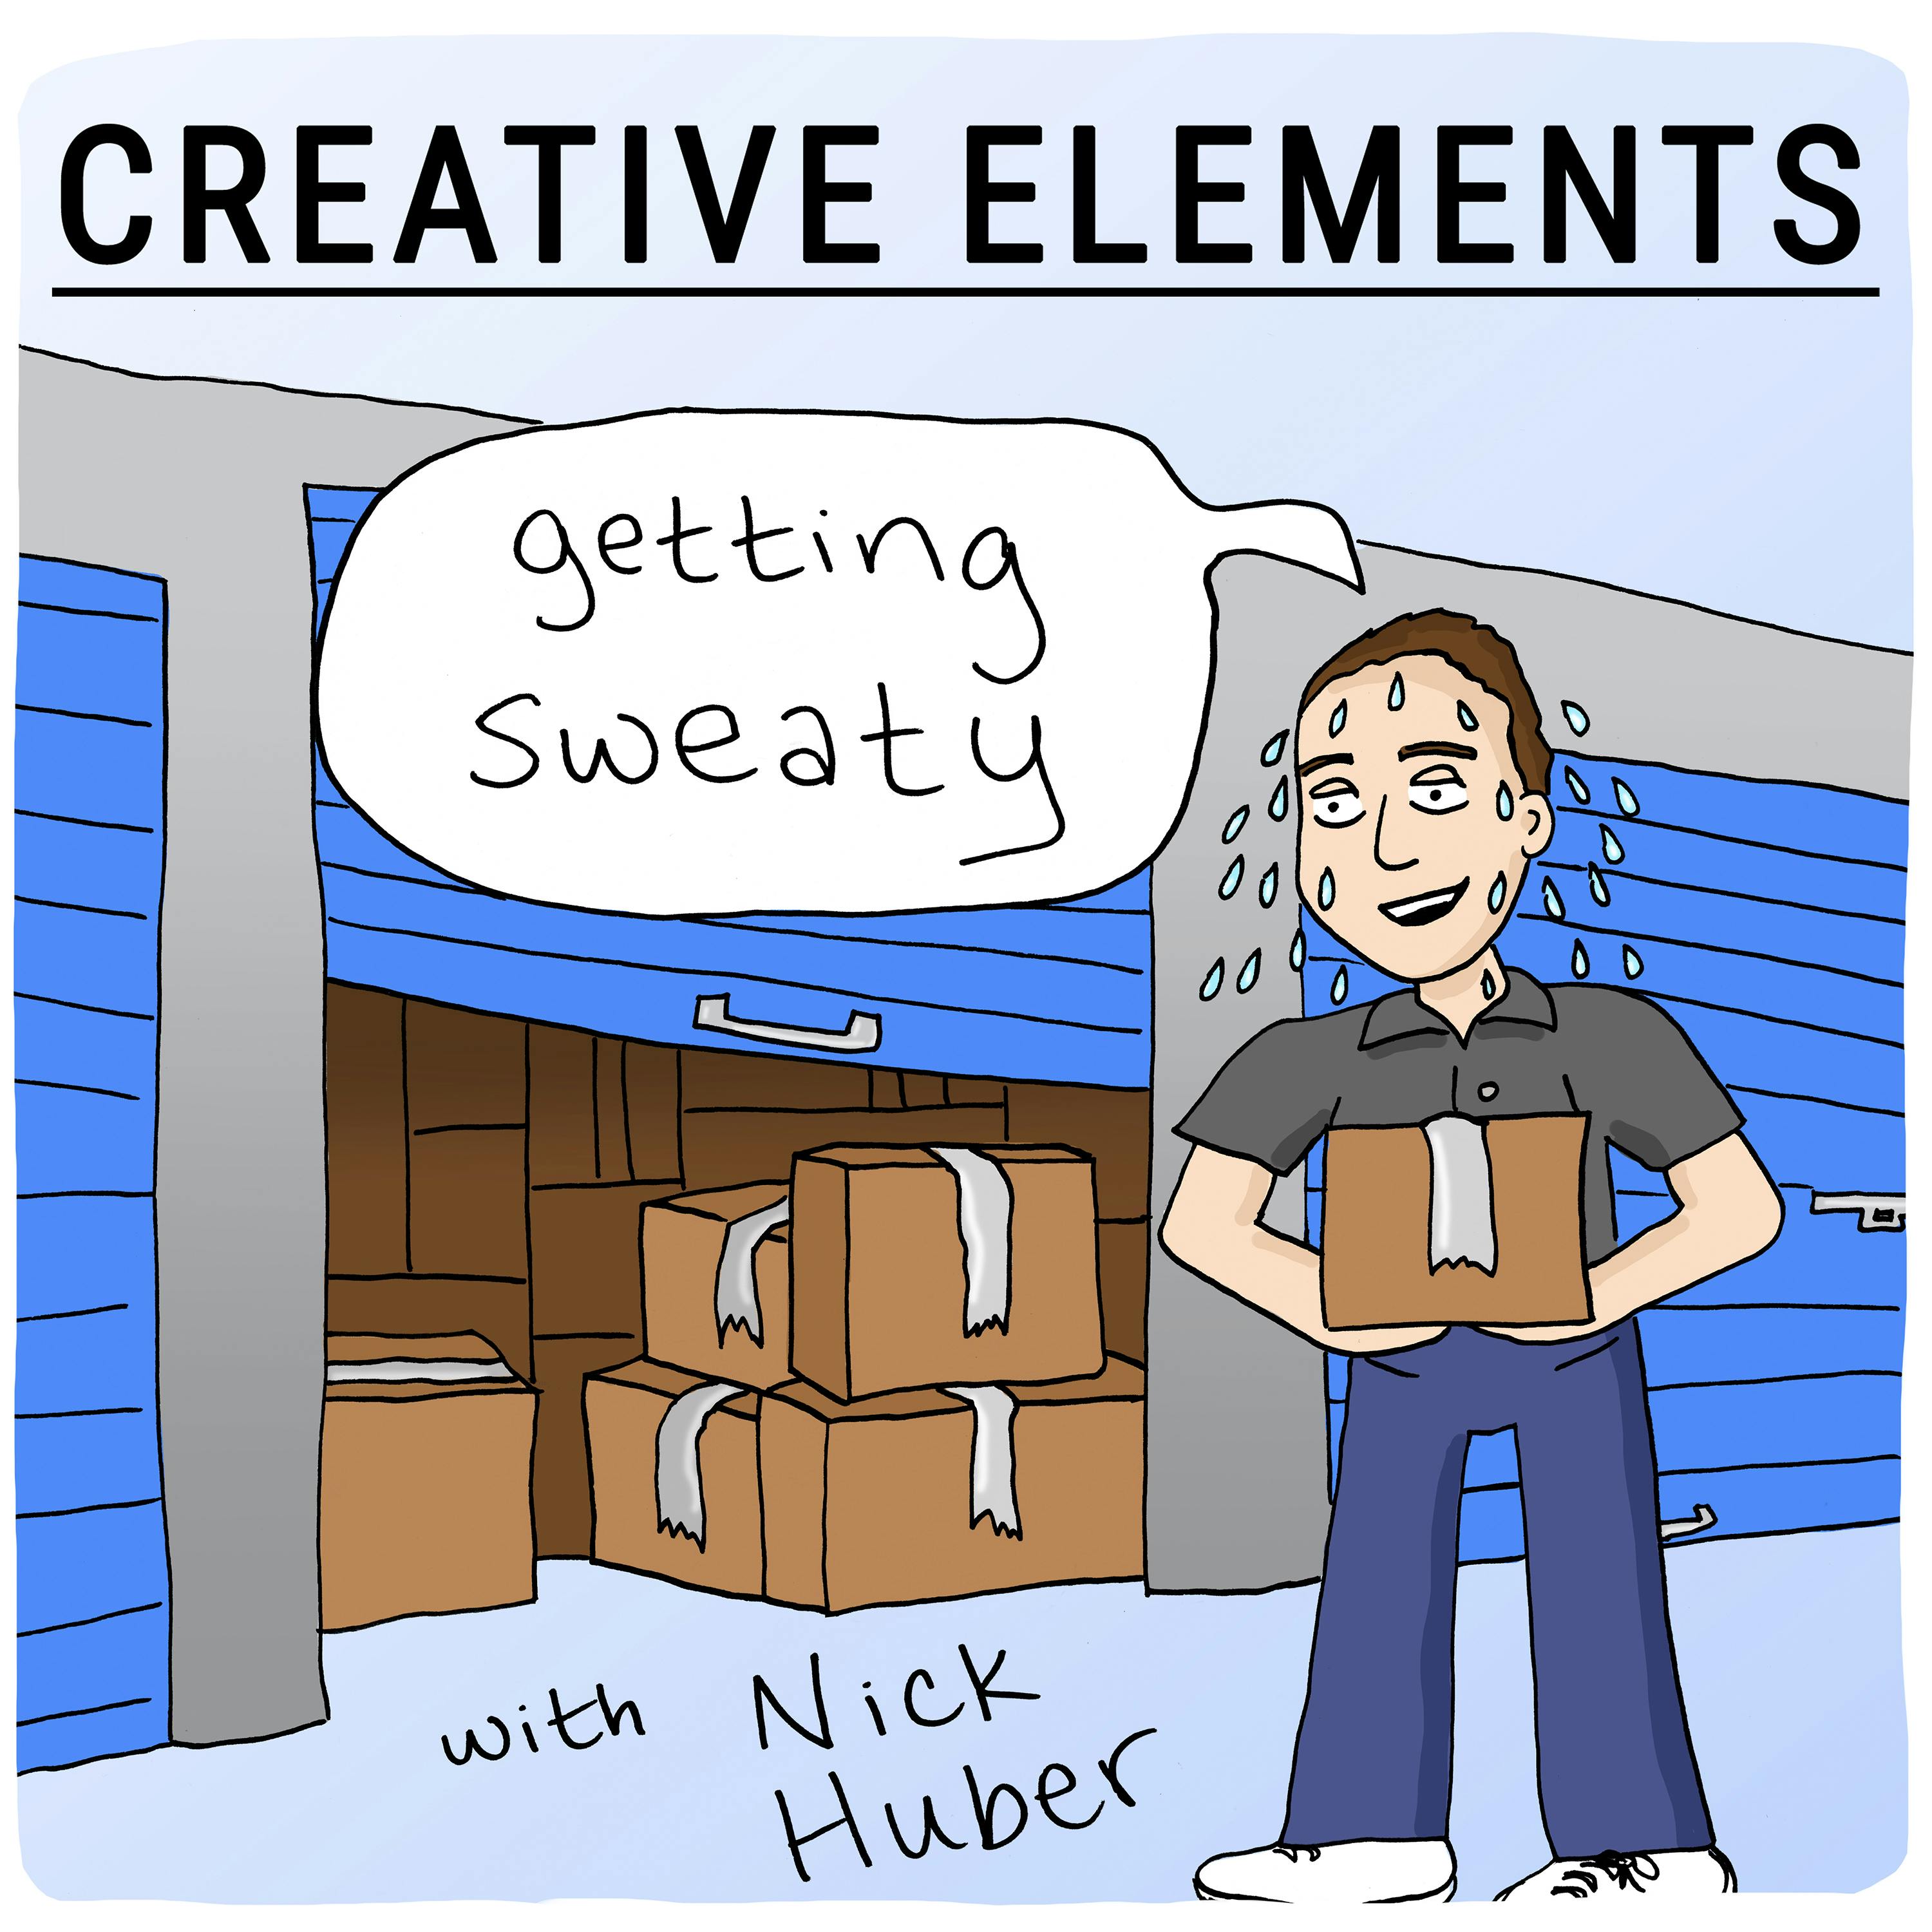 #70: Nick Huber [Getting Sweaty] – What online creators can learn from sweaty startups Image